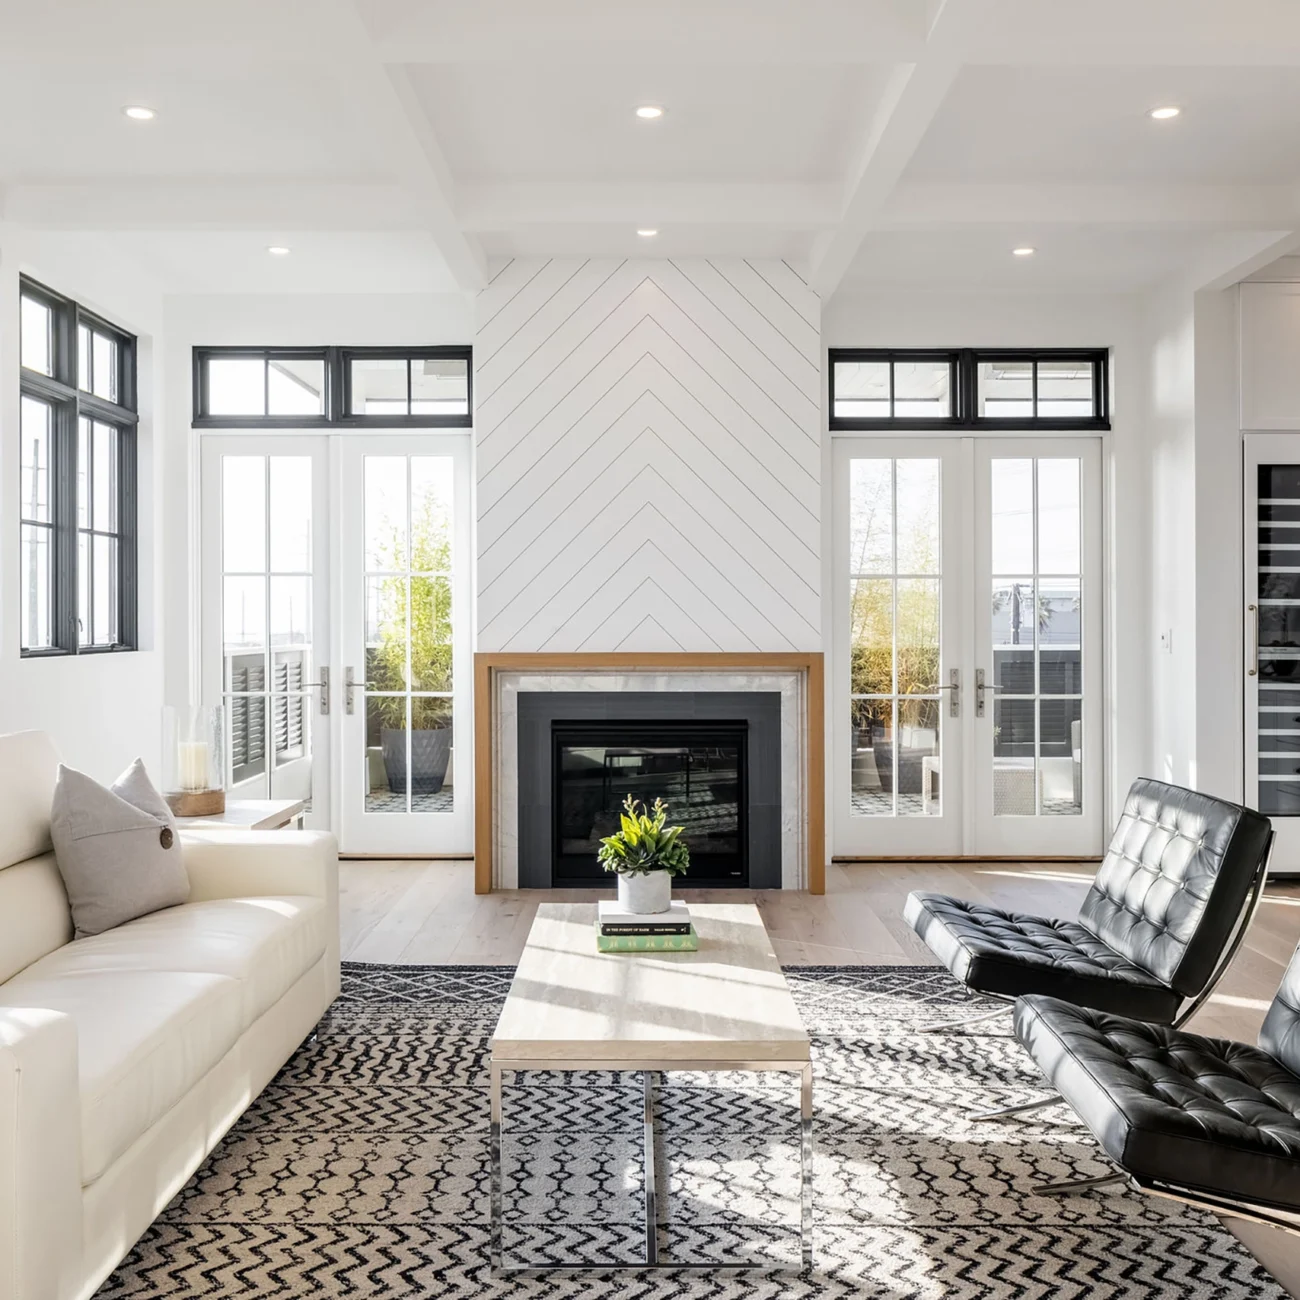 Christine Vroom Interiors | 36th | Costal, bright, white, living room with black accents and fireplace